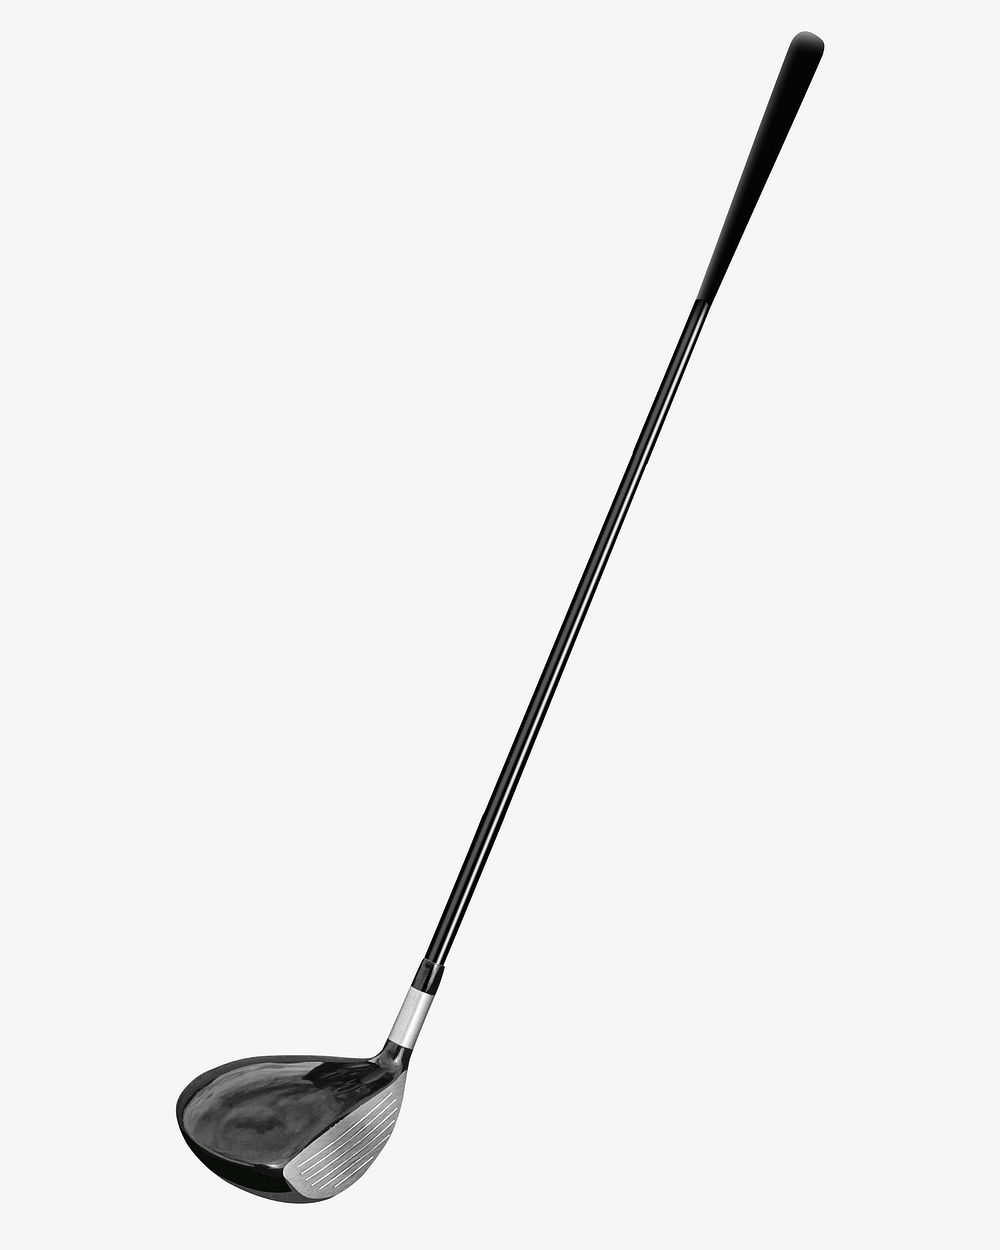 Golf club isolated image on white